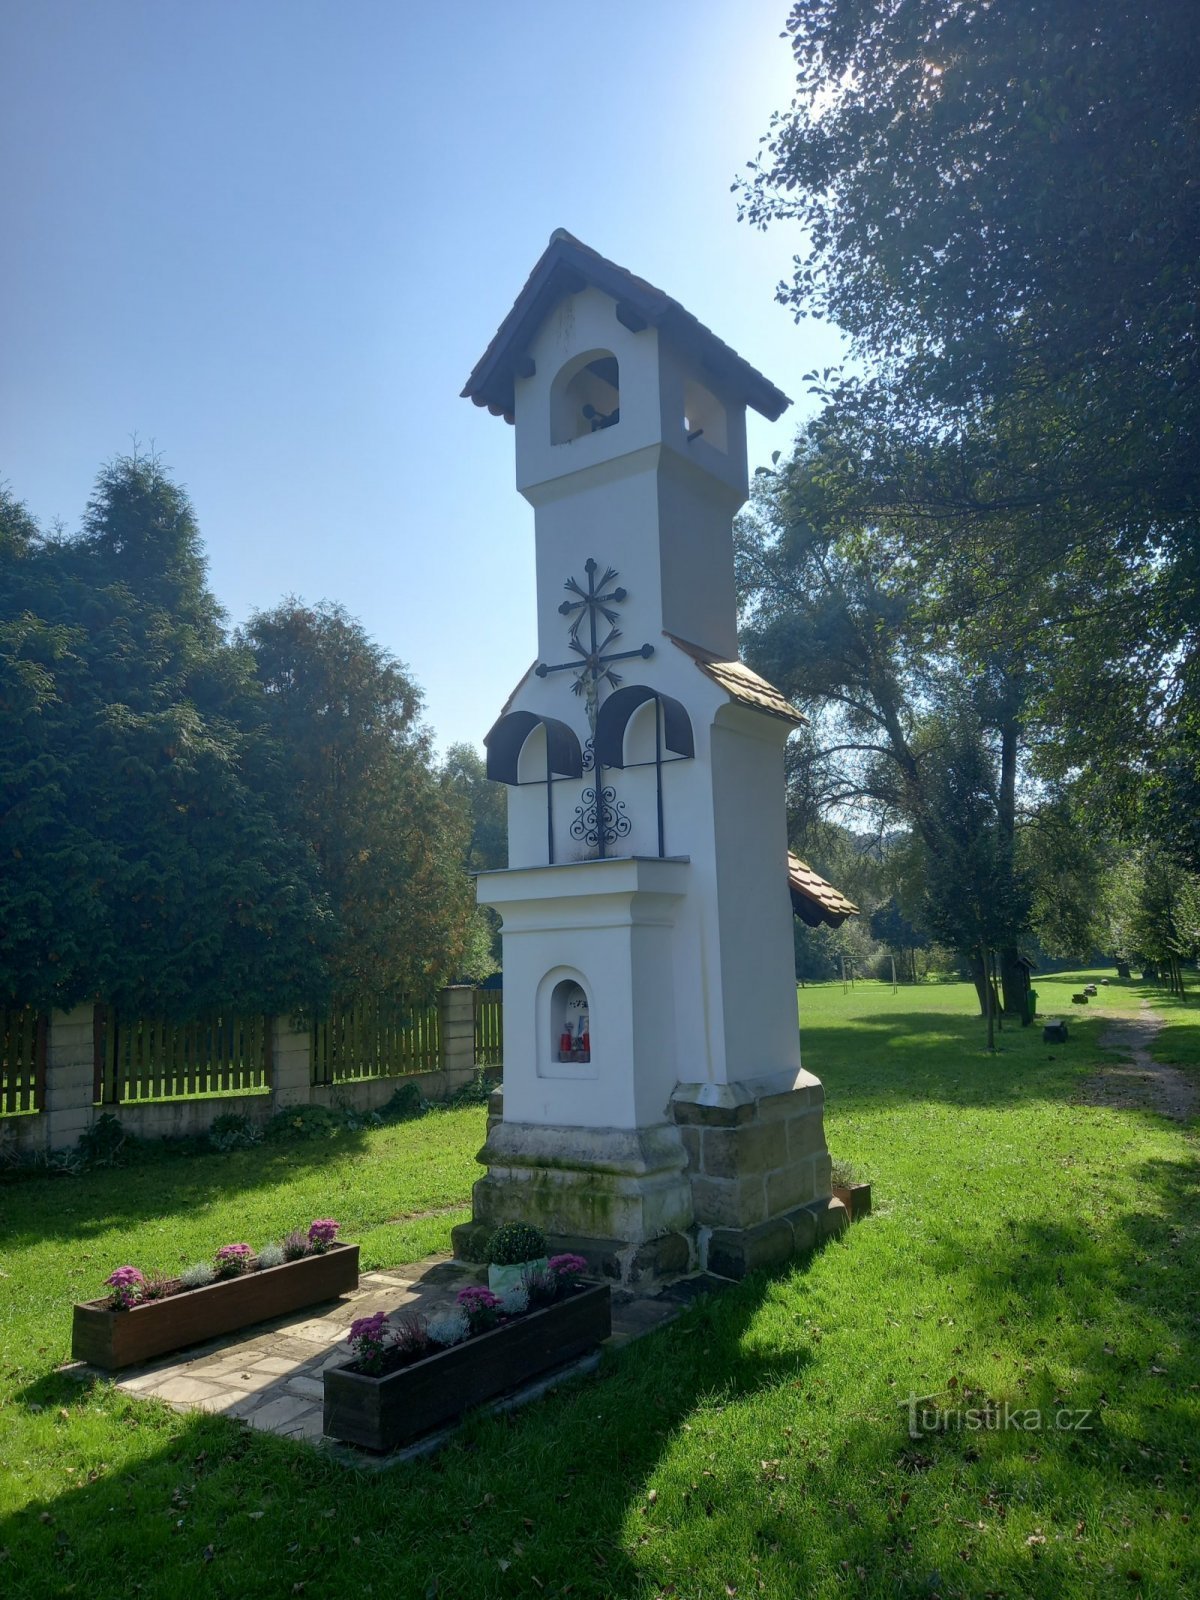 Bell tower in Tupadle